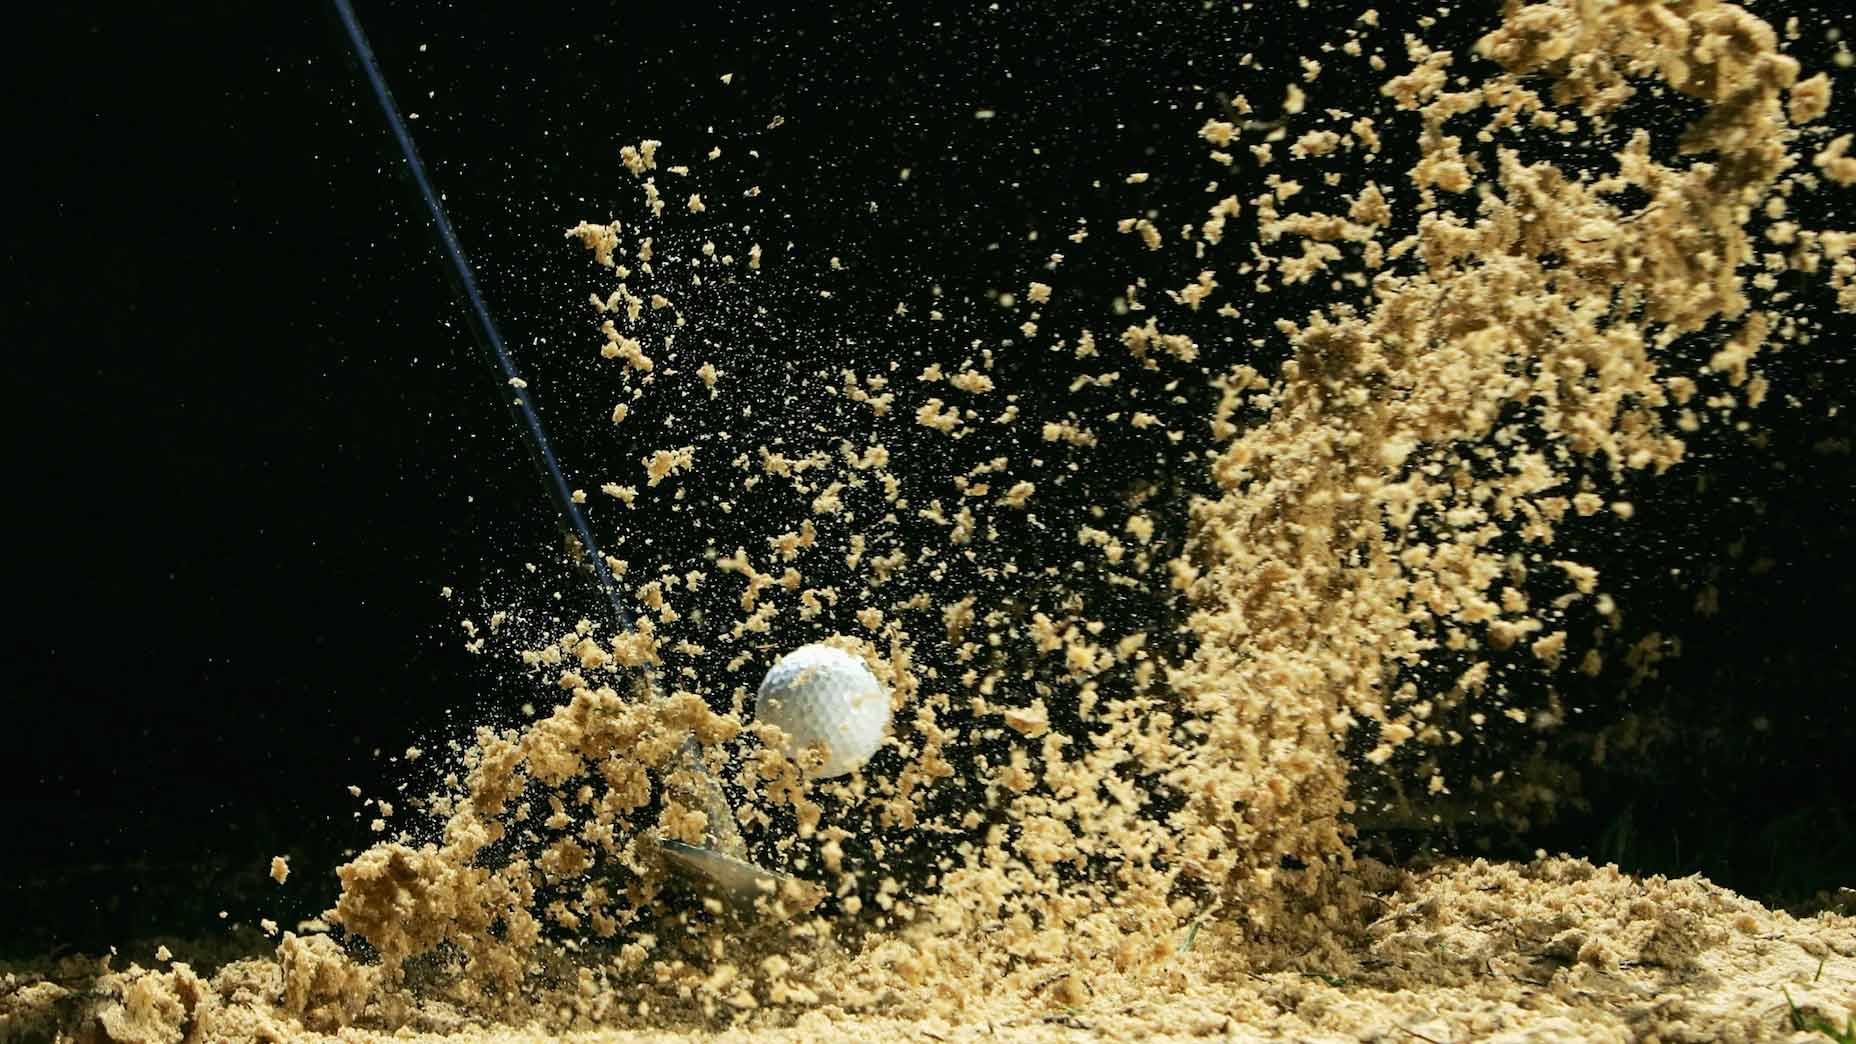 Sand flies up as a golf ball in a bunker is struck by a wedge in front of a black background